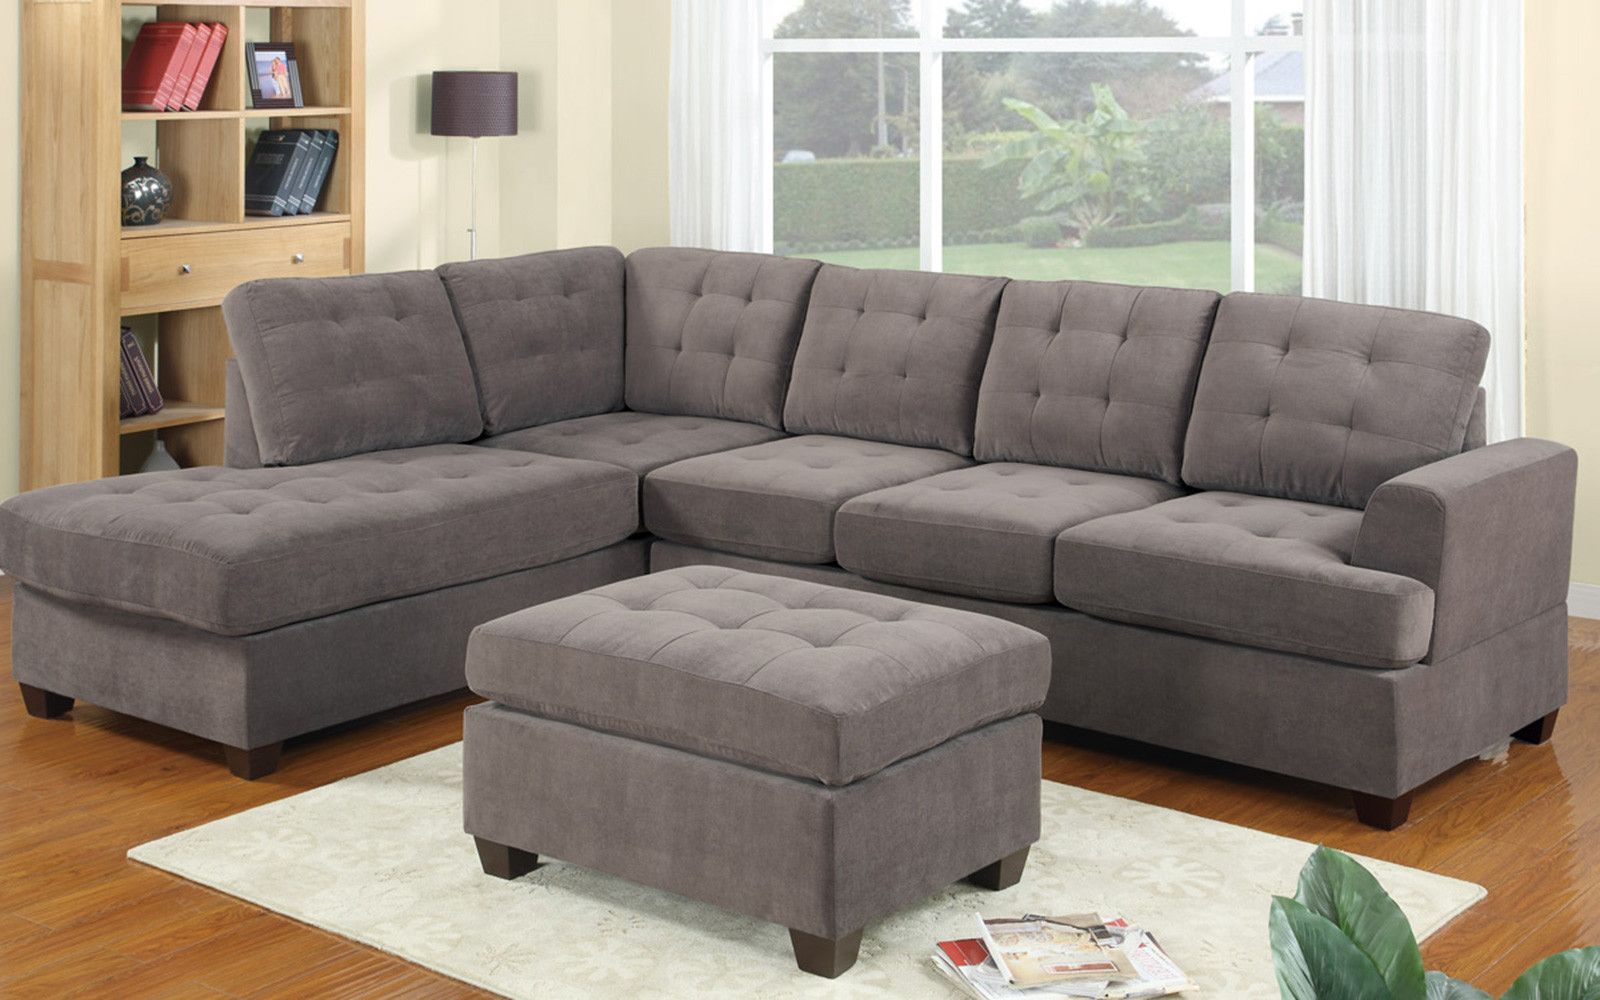 Widely Used Karen 3 Piece Sectionals Inside Target Marketing Systems Storage Chaise Lounge – Walmart (View 6 of 20)